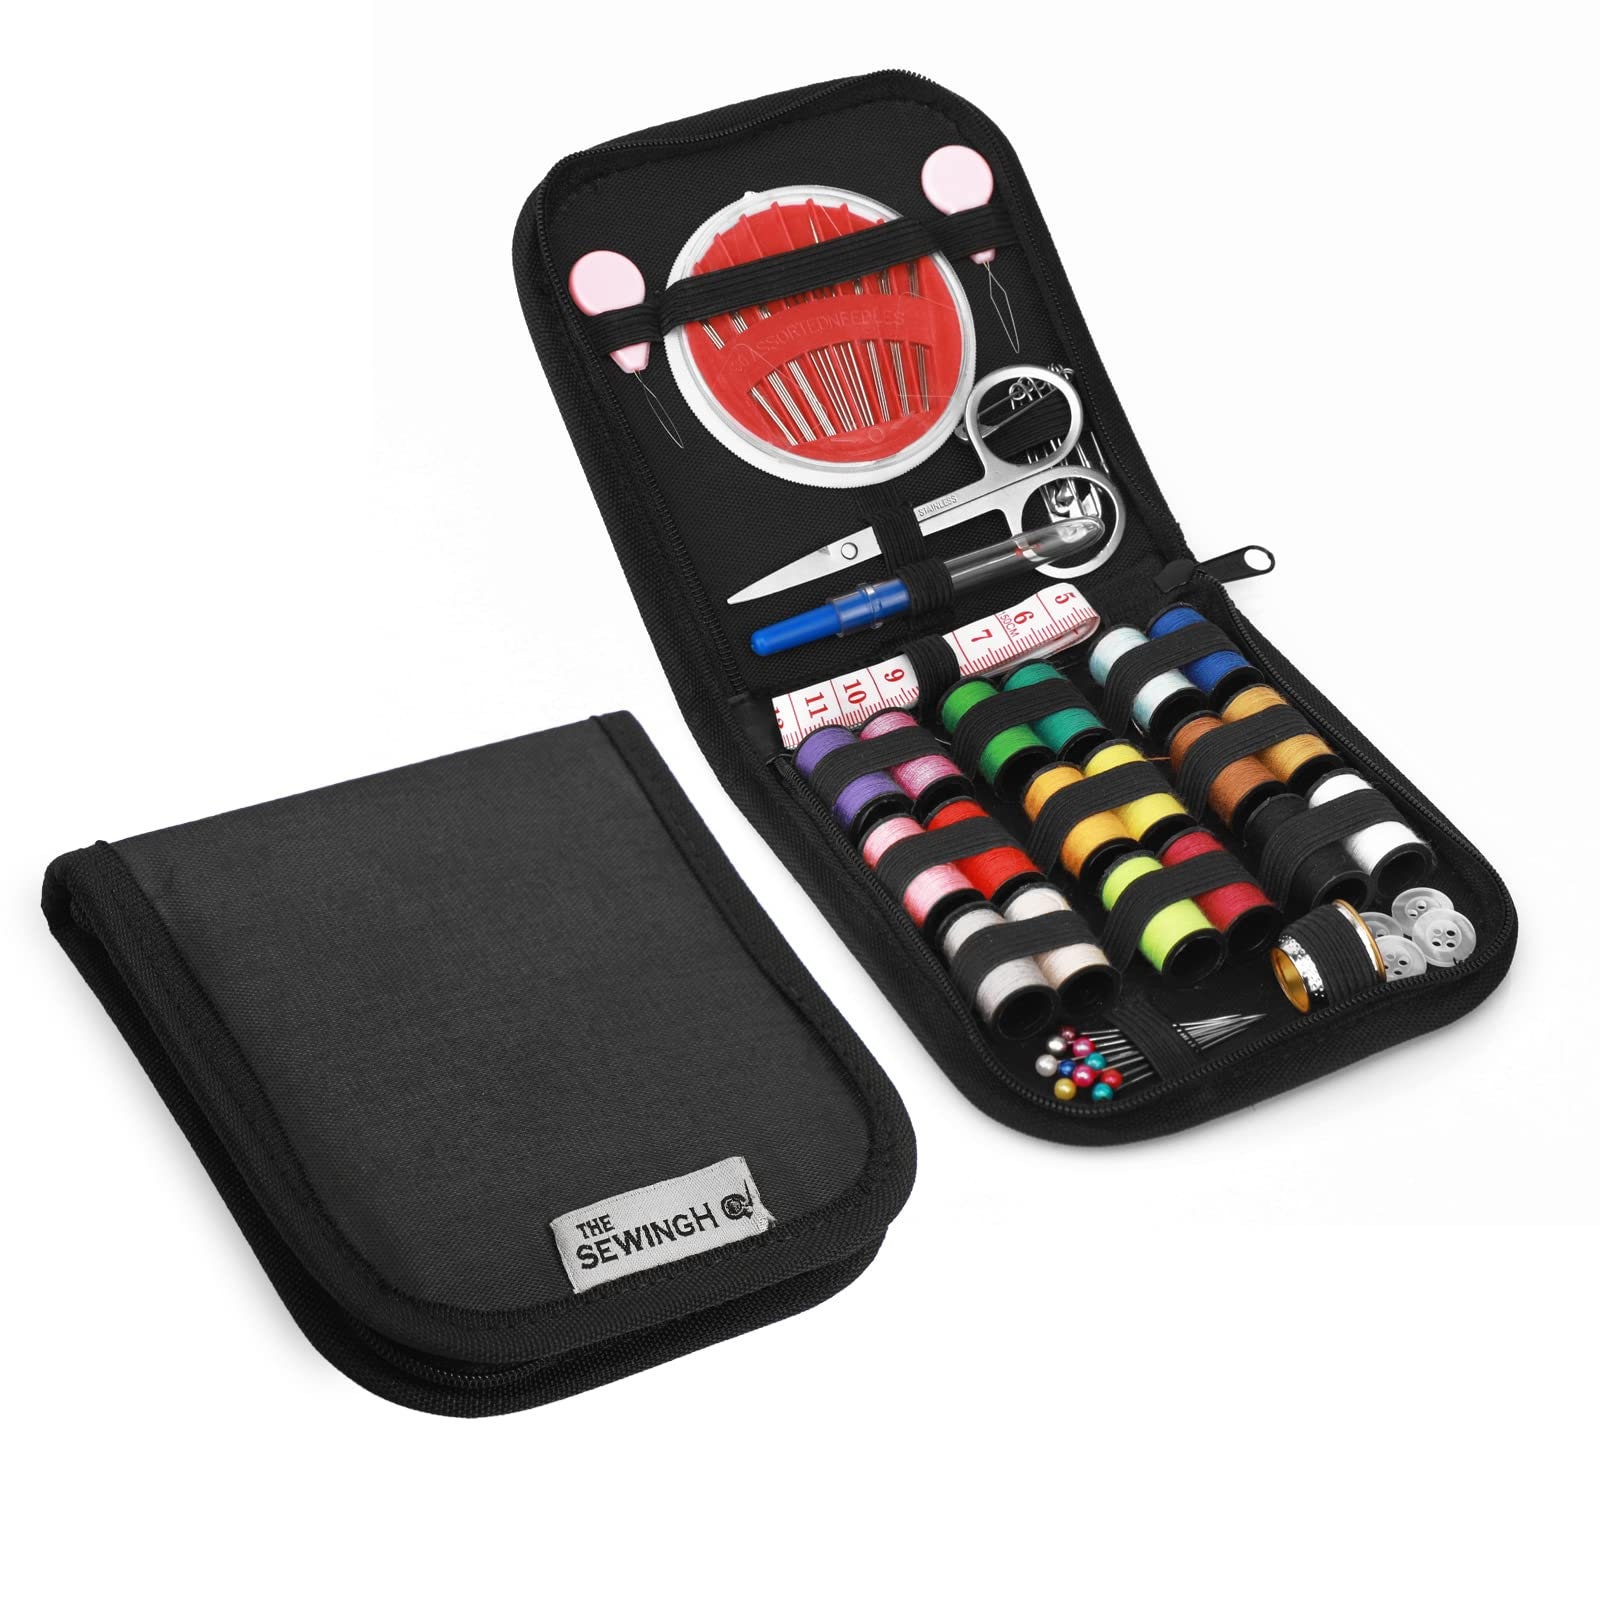 Black Basic Sewing Kit, Compact Travel Pouch, 72 Piece Haberdashery Set for  Beginners, Home Repairs the Sewing HQ 